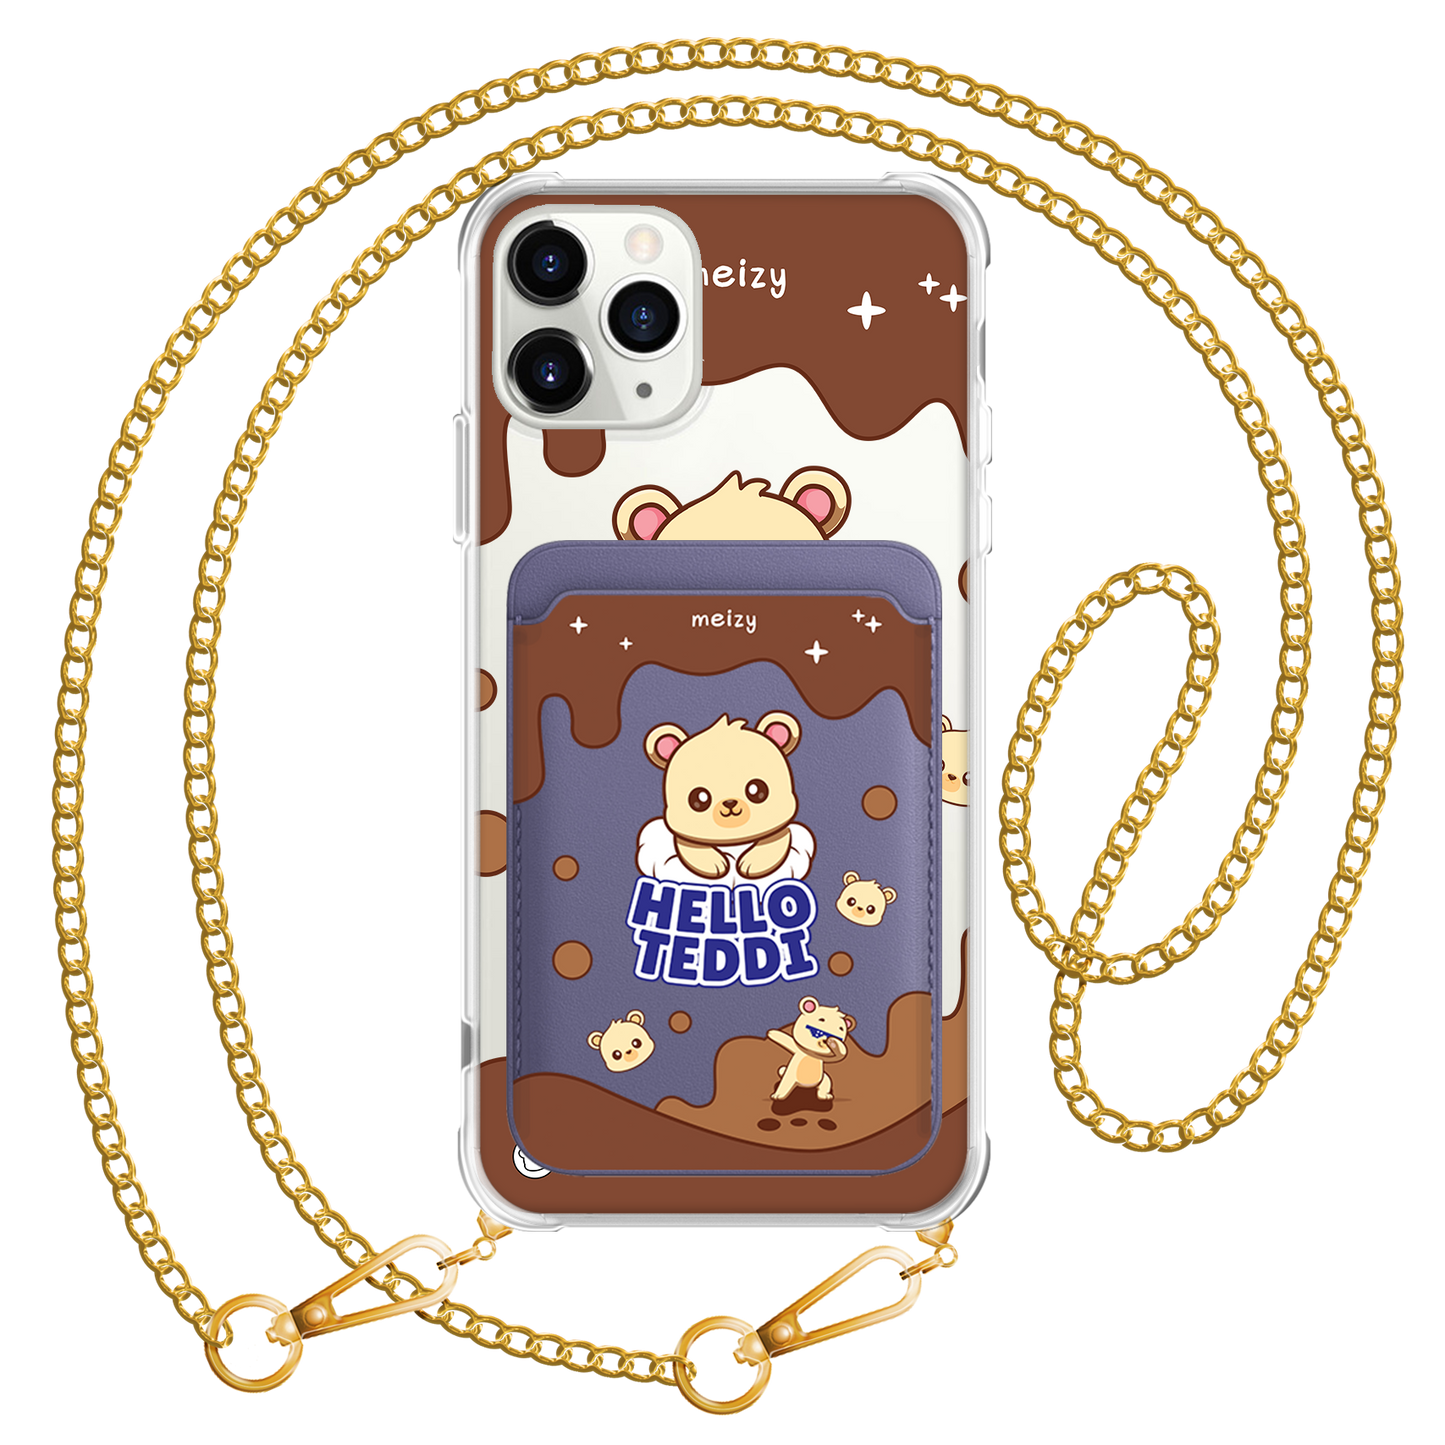 iPhone Magnetic Wallet Case - Hello Teddy 1.0